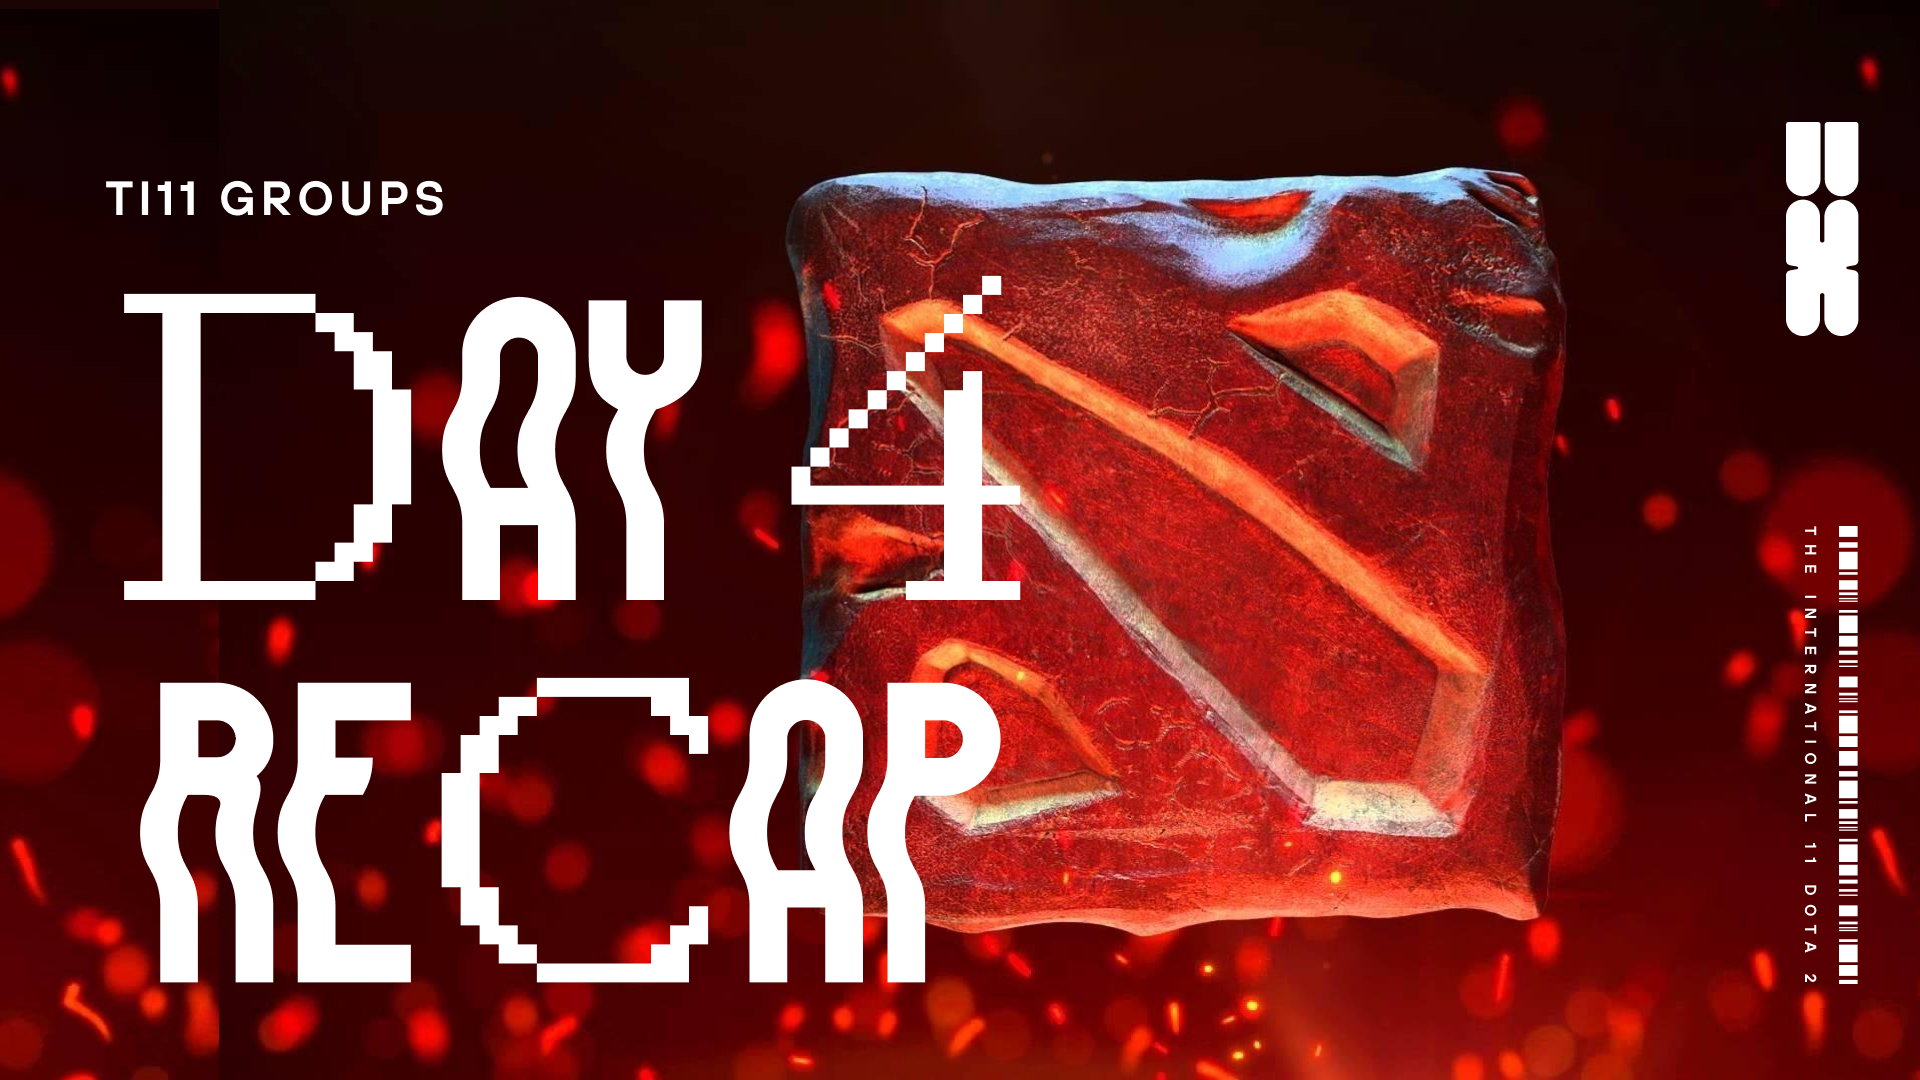 The Dota 2 symbol appears against a black background sparkling with fiery embers